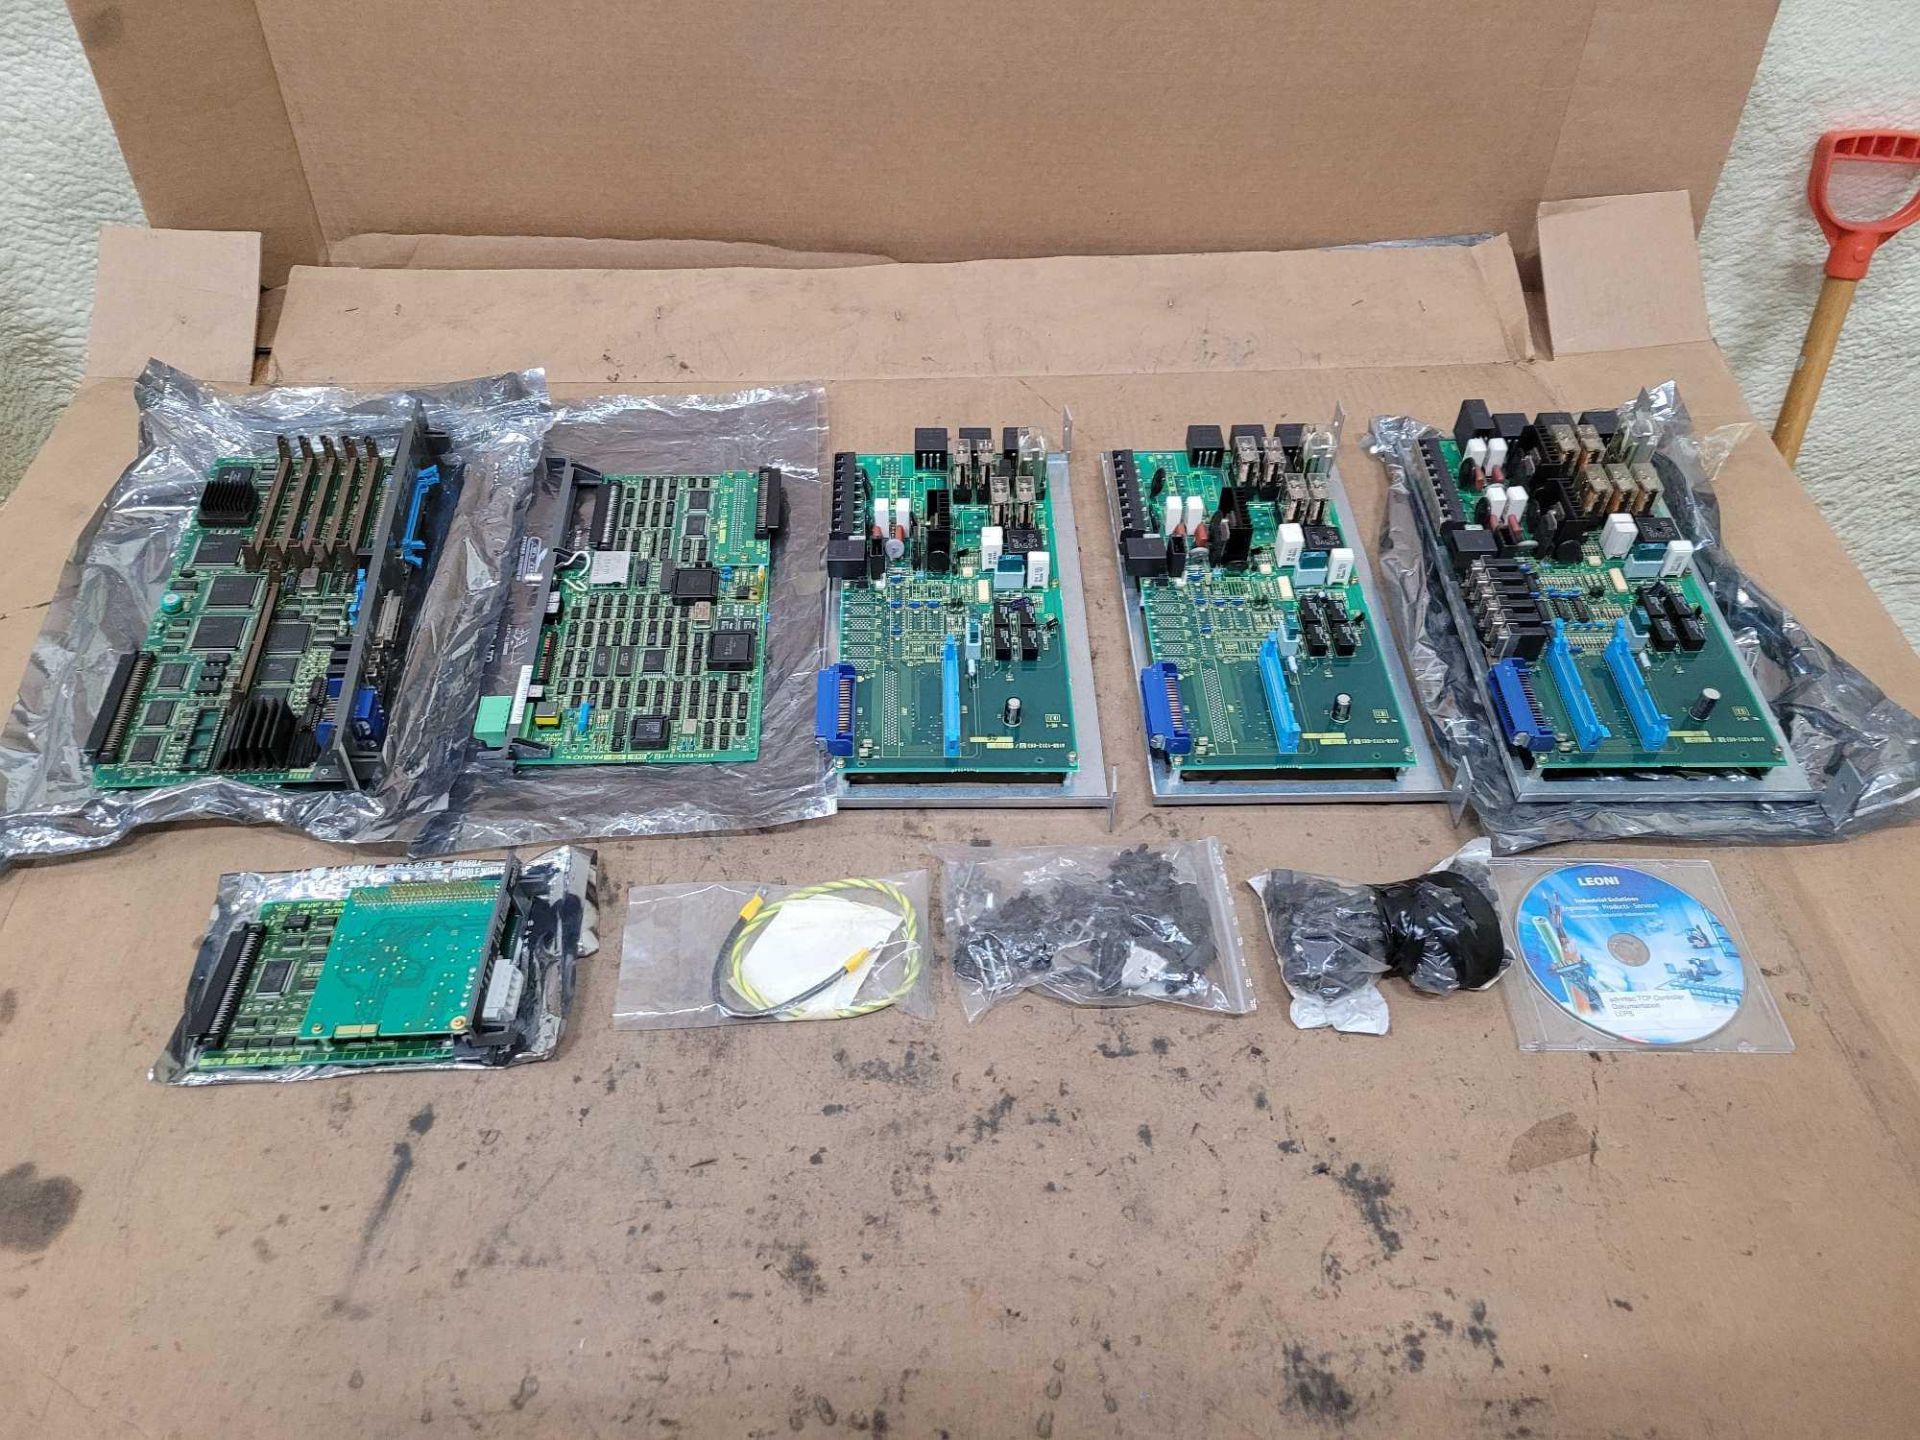 LOT OF 6 FANUC BOARDS W/ MISC HARDWARE/SOFTWARE [1] A16B-3200-0040/04C [1] A20B-8001-0120/04B [2] A1